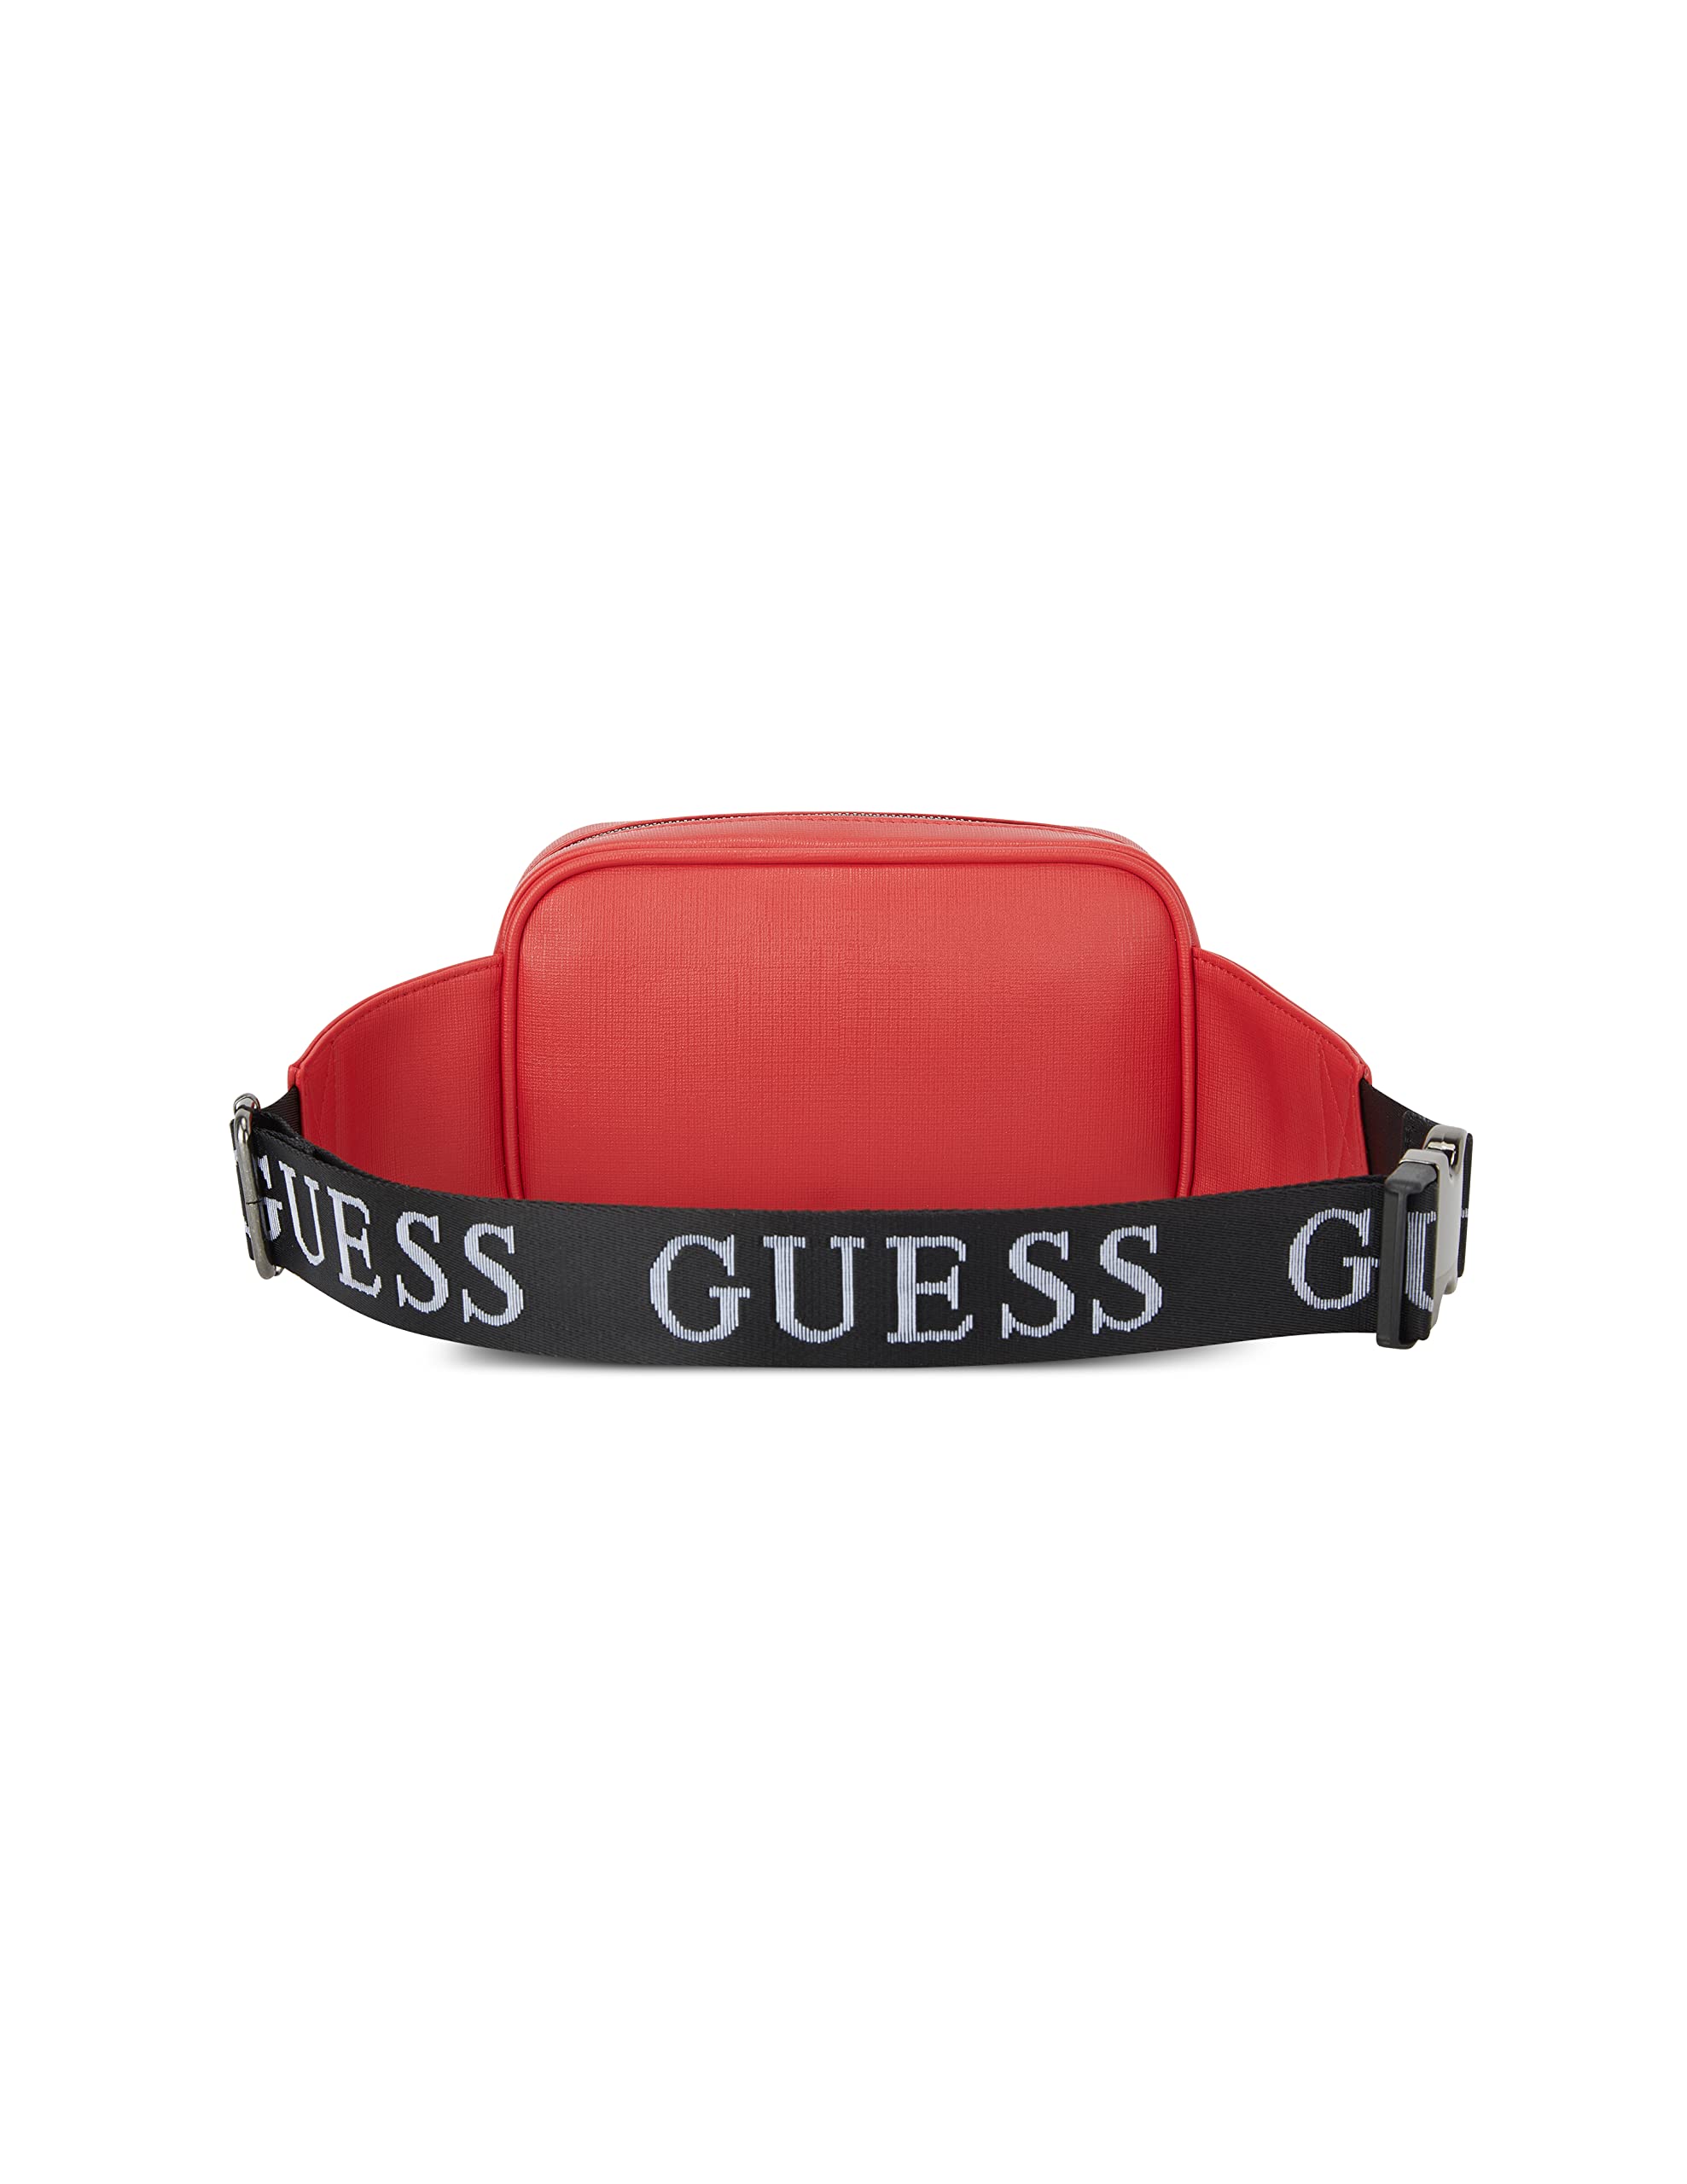 GUESS Outfitters Bum Bag